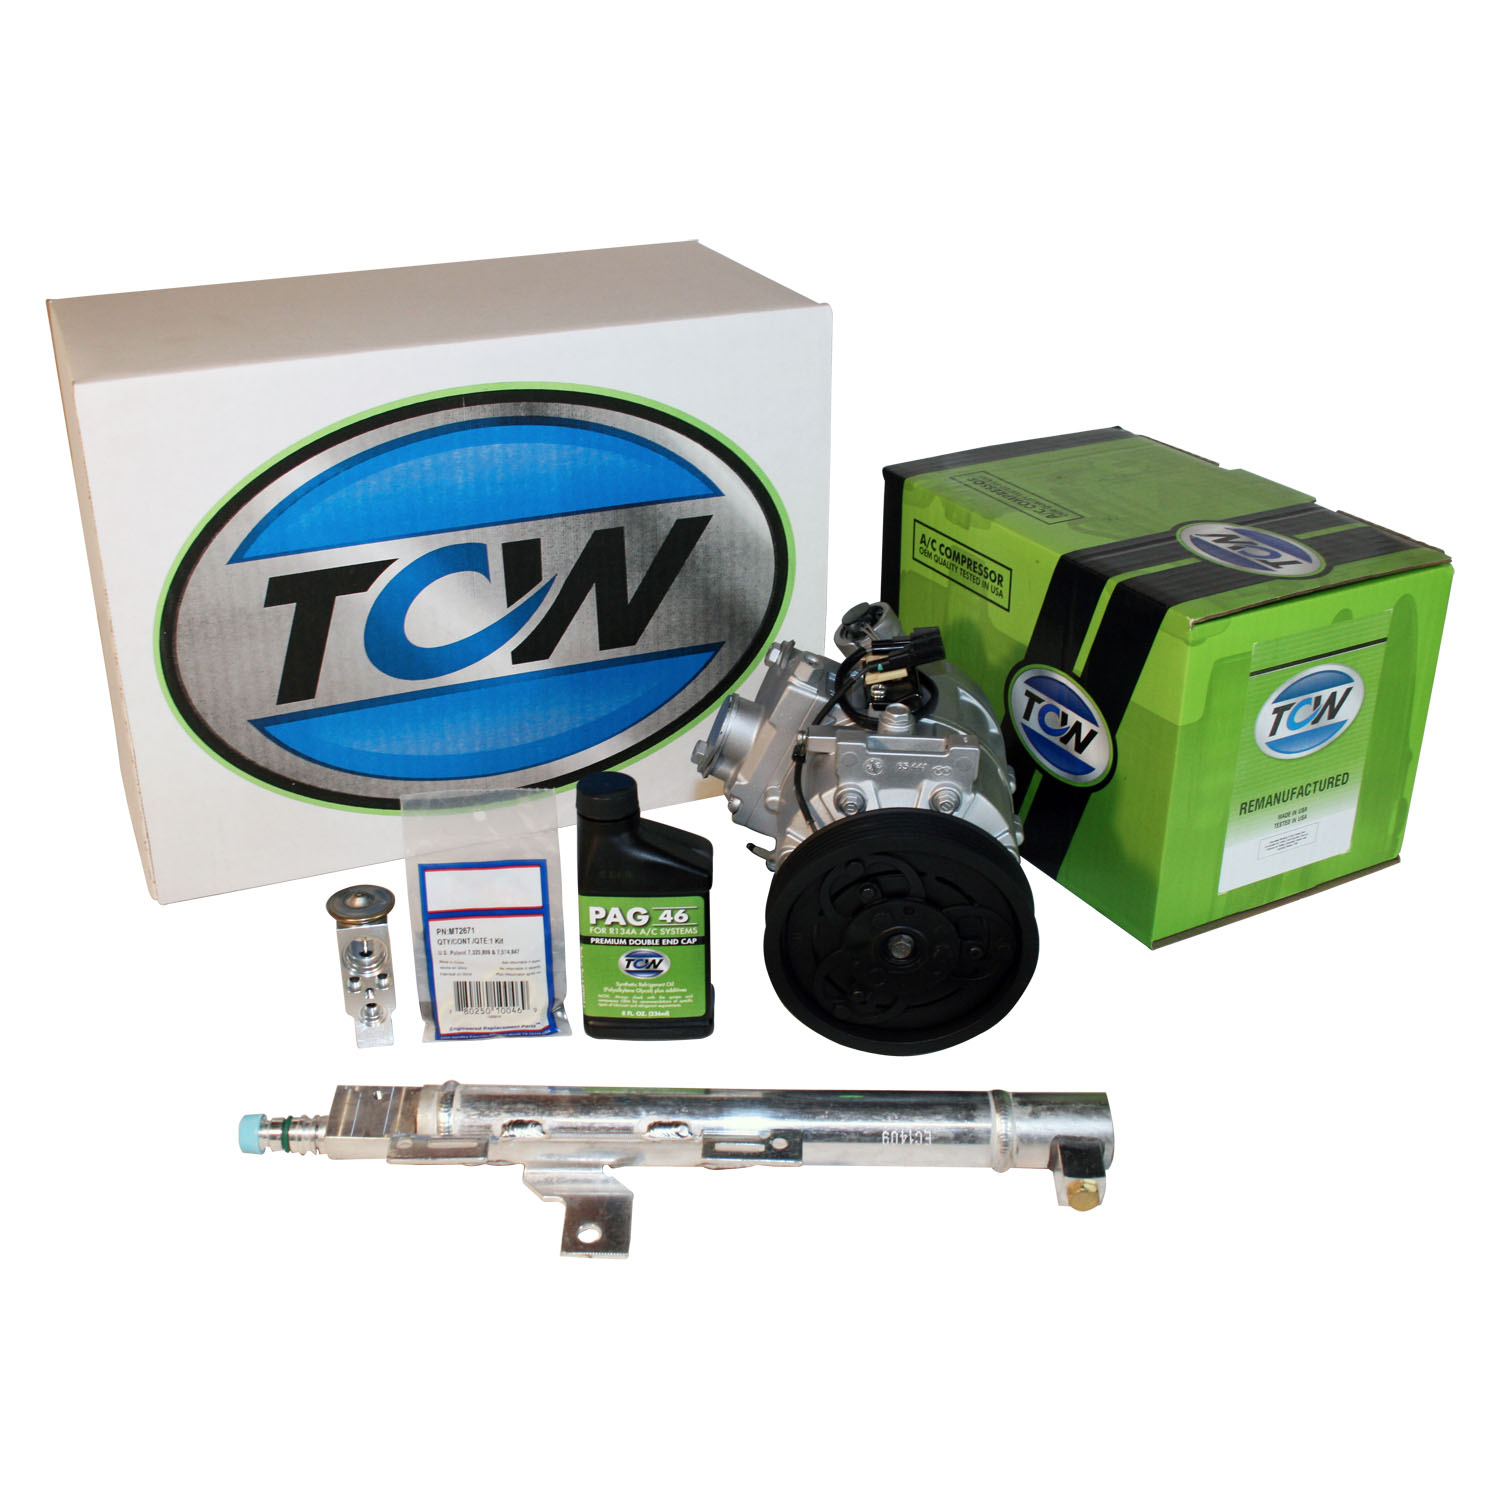 TCW Vehicle A/C Kit K1000478R Remanufactured Product Image field_60b6a13a6e67c